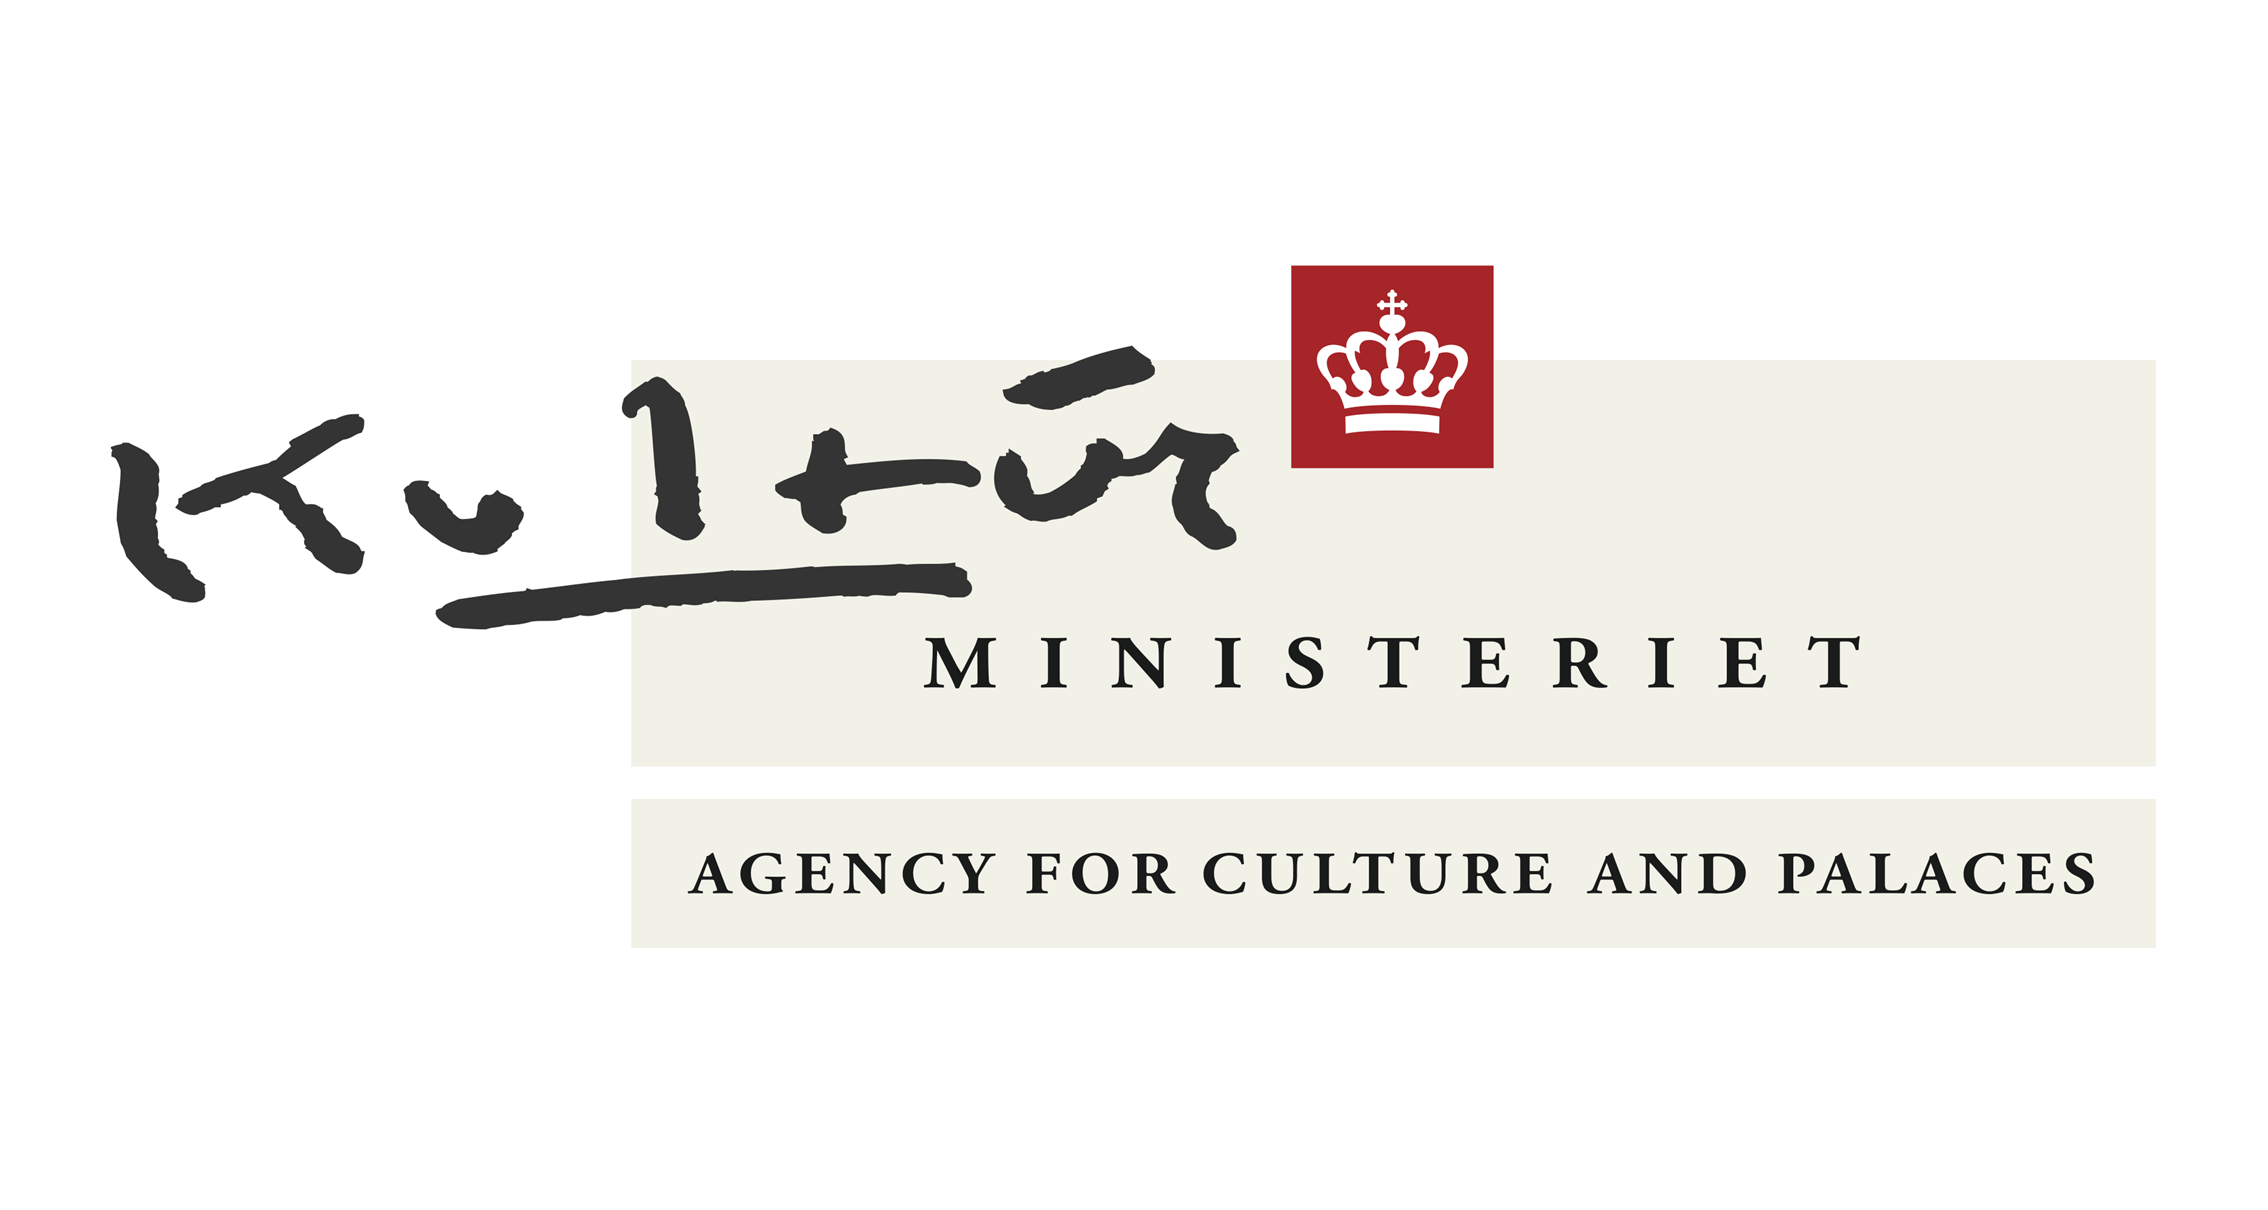 Kultúr Ministeriet Agency for Culture and Palaces (Denmark)